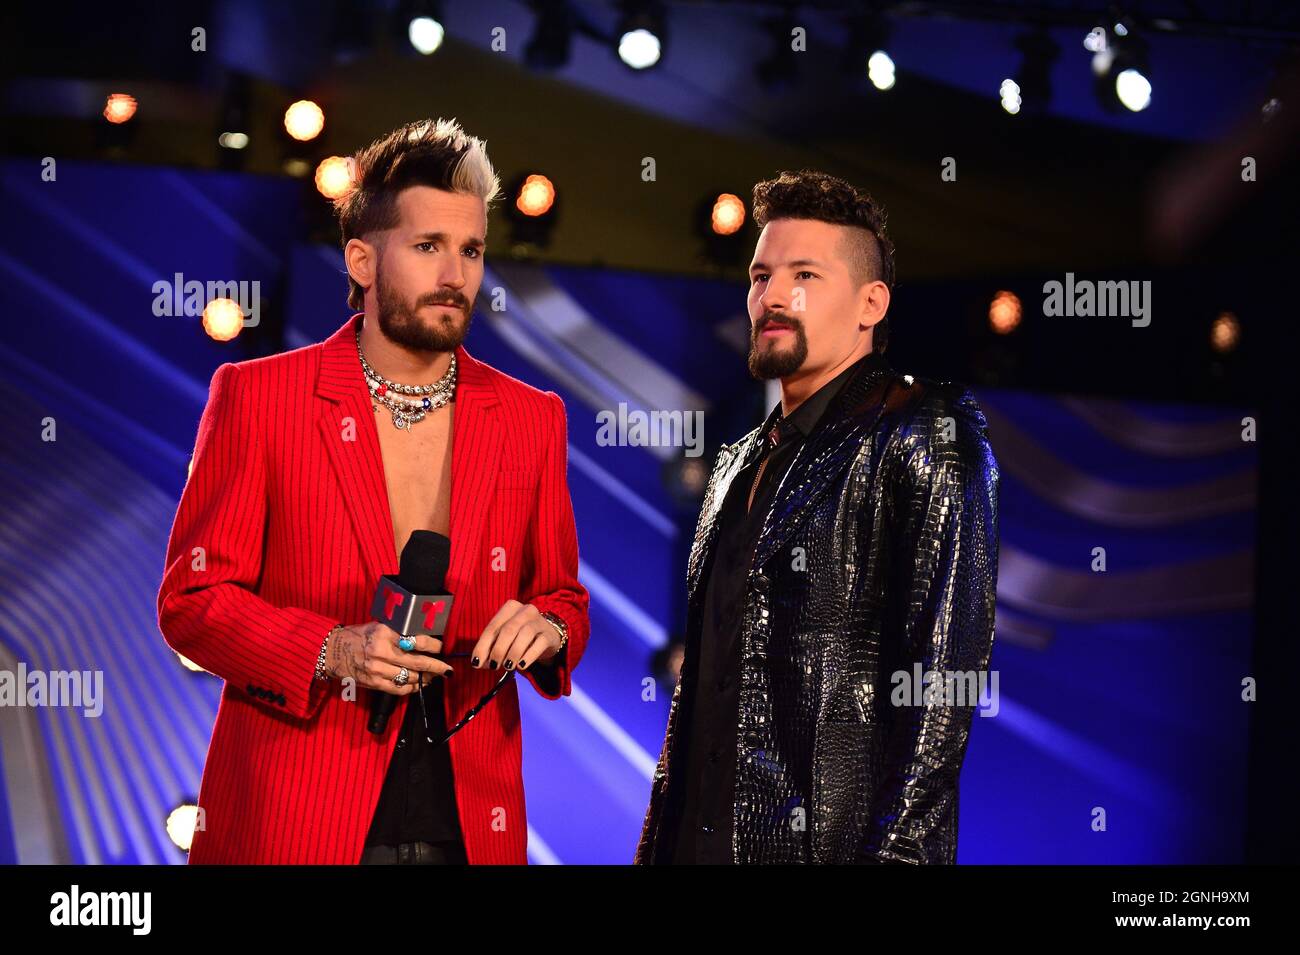 Coral Gables, USA. 23rd Sep, 2021. CORAL GABLES, FLORIDA - SEPTEMBER 23: Mau y Ricky attends the 2021 Billboard Latin Music Awards at Watsco Center on September 23, 2021 in Coral Gables, Florida. (Photo by JL/Sipa USA) Credit: Sipa USA/Alamy Live News Stock Photo